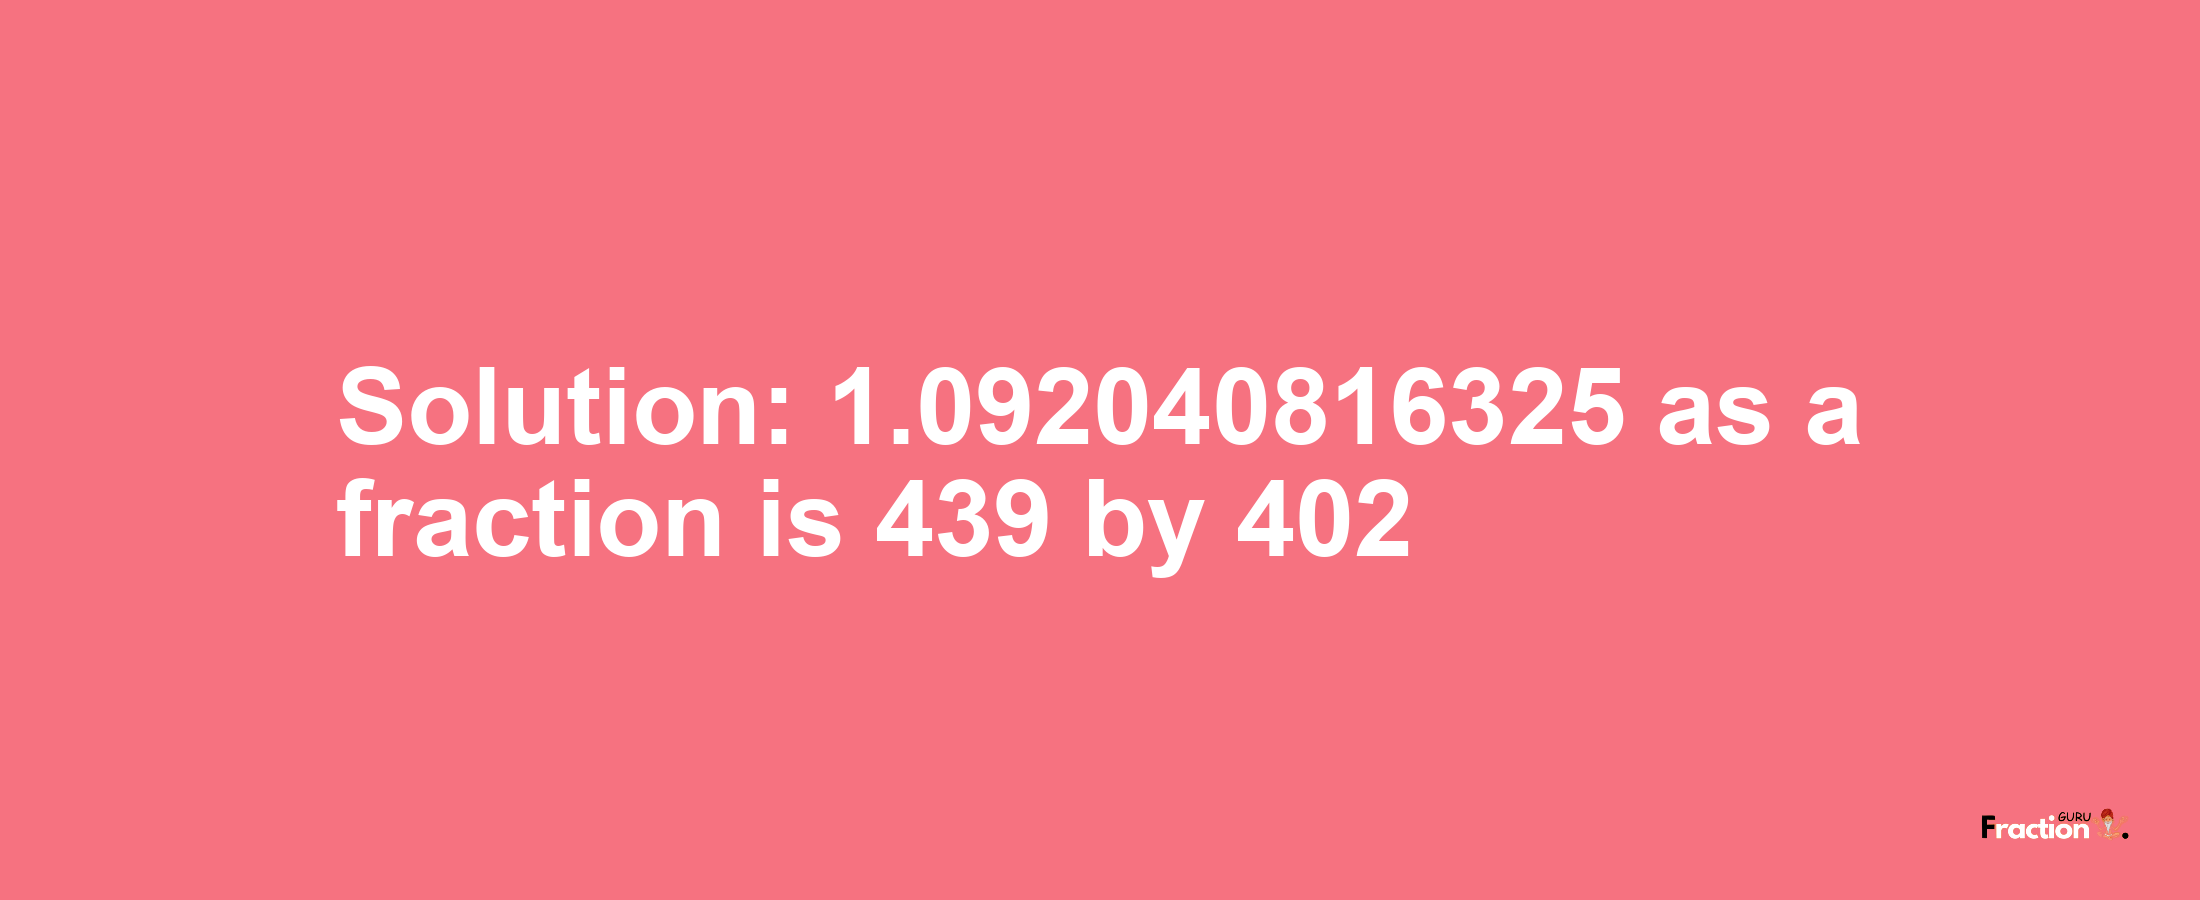 Solution:1.092040816325 as a fraction is 439/402